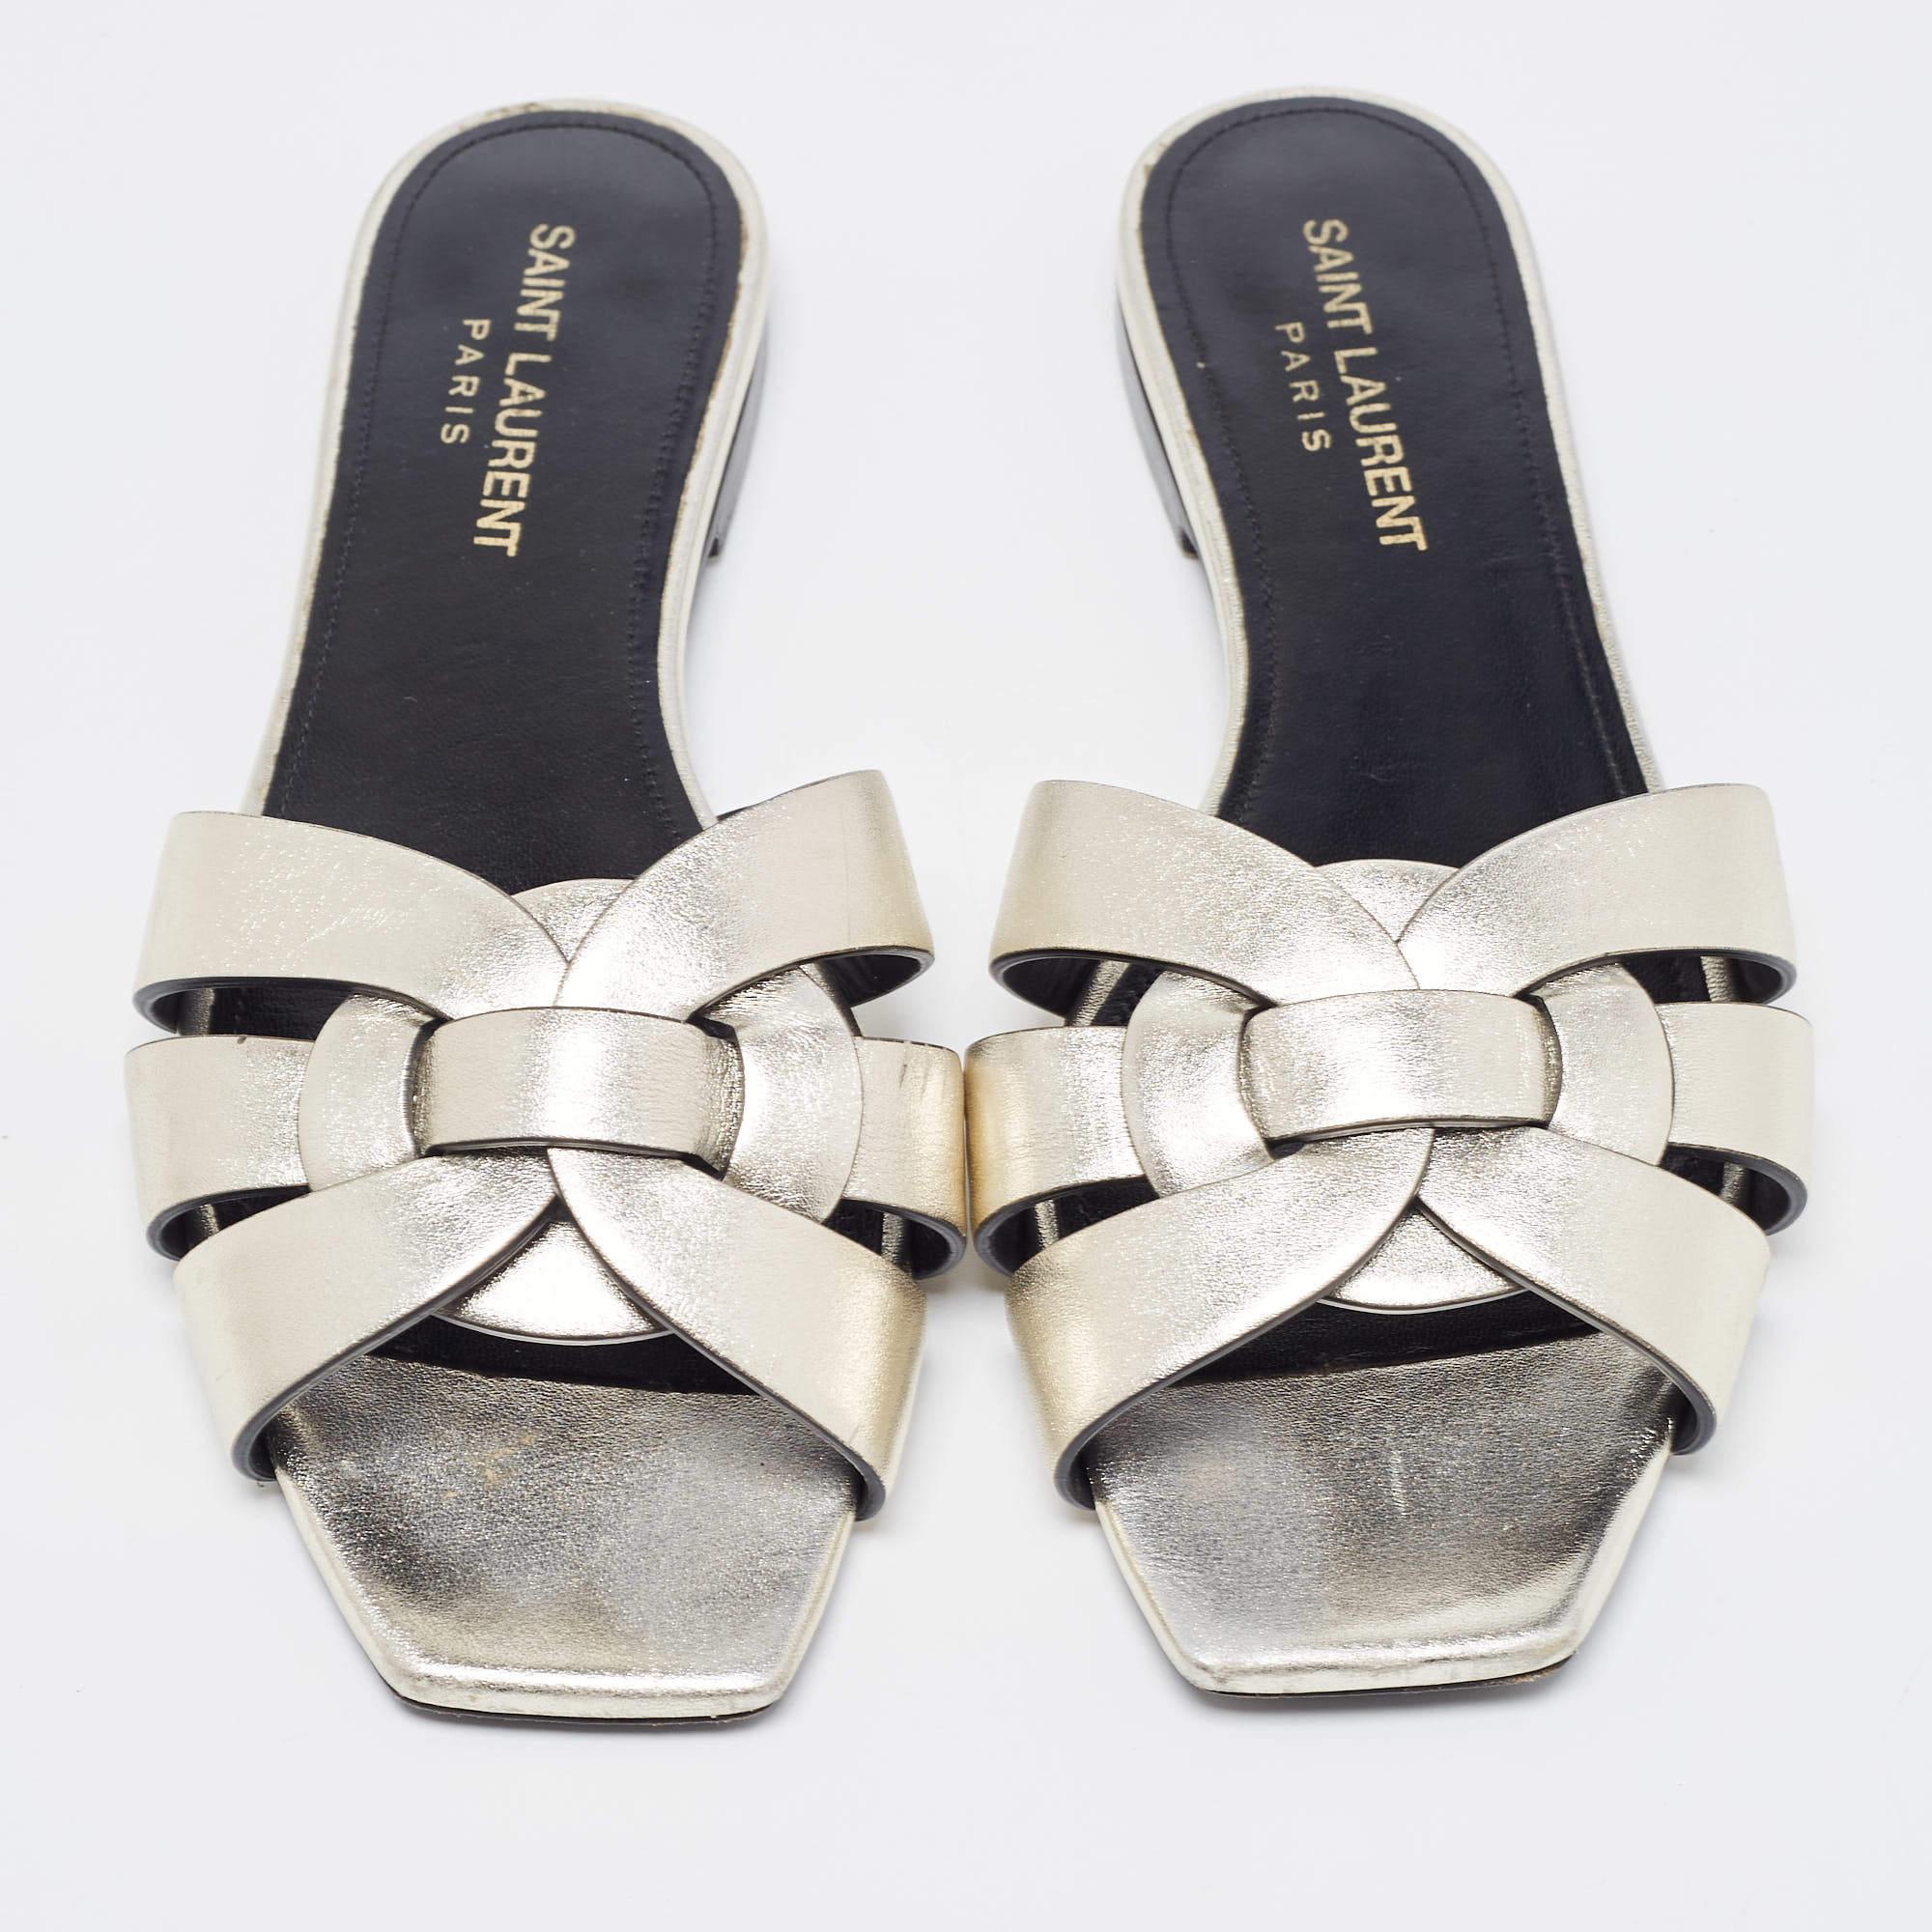 Enhance your casual looks with a touch of high style with these designer slides. Rendered in quality material with a lovely hue adorning its expanse, this pair is a must-have!

Includes: Original Dustbag

